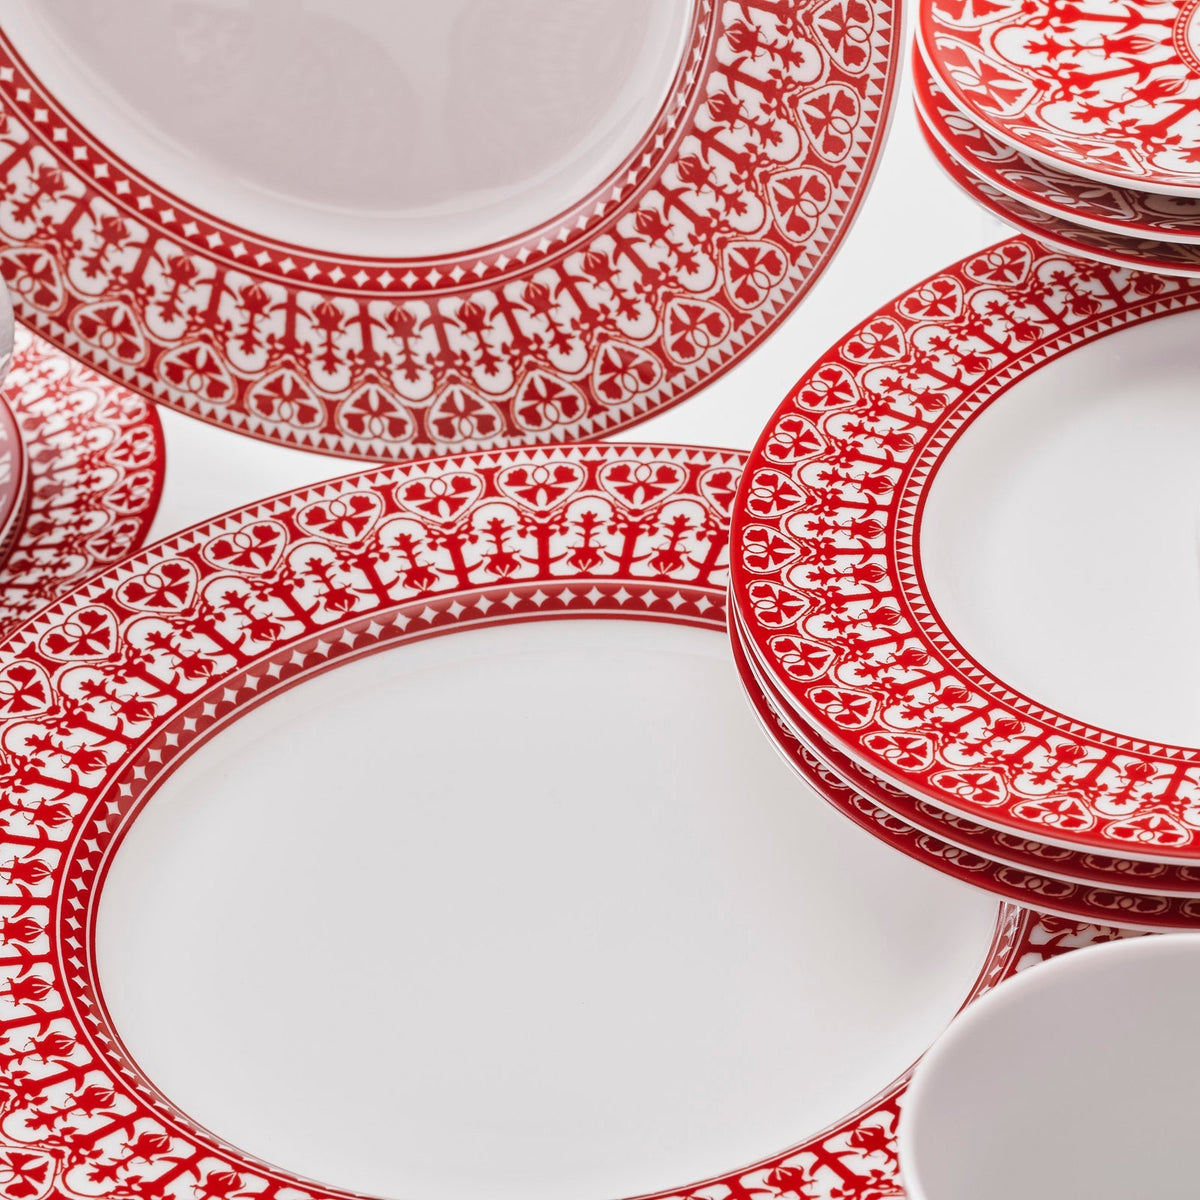 Casablanca in Crimson 16 piece dinnerware set in red and white porcelain from Caskata. Complete Table for 4